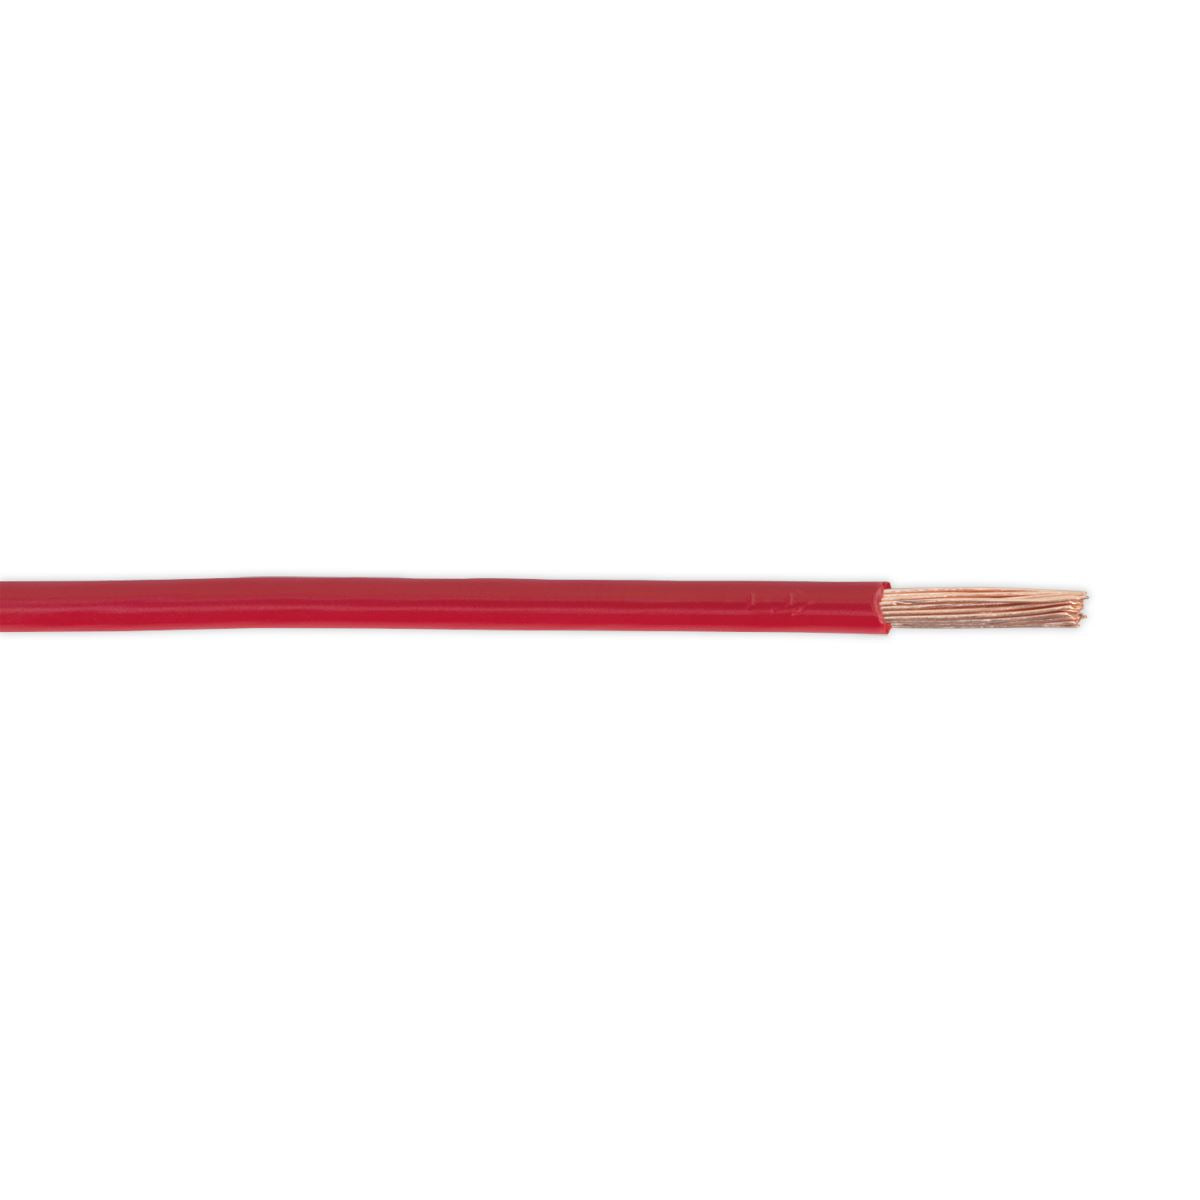 Sealey Automotive Cable Thin Wall Single 3mm² 44/0.30mm 30m Red